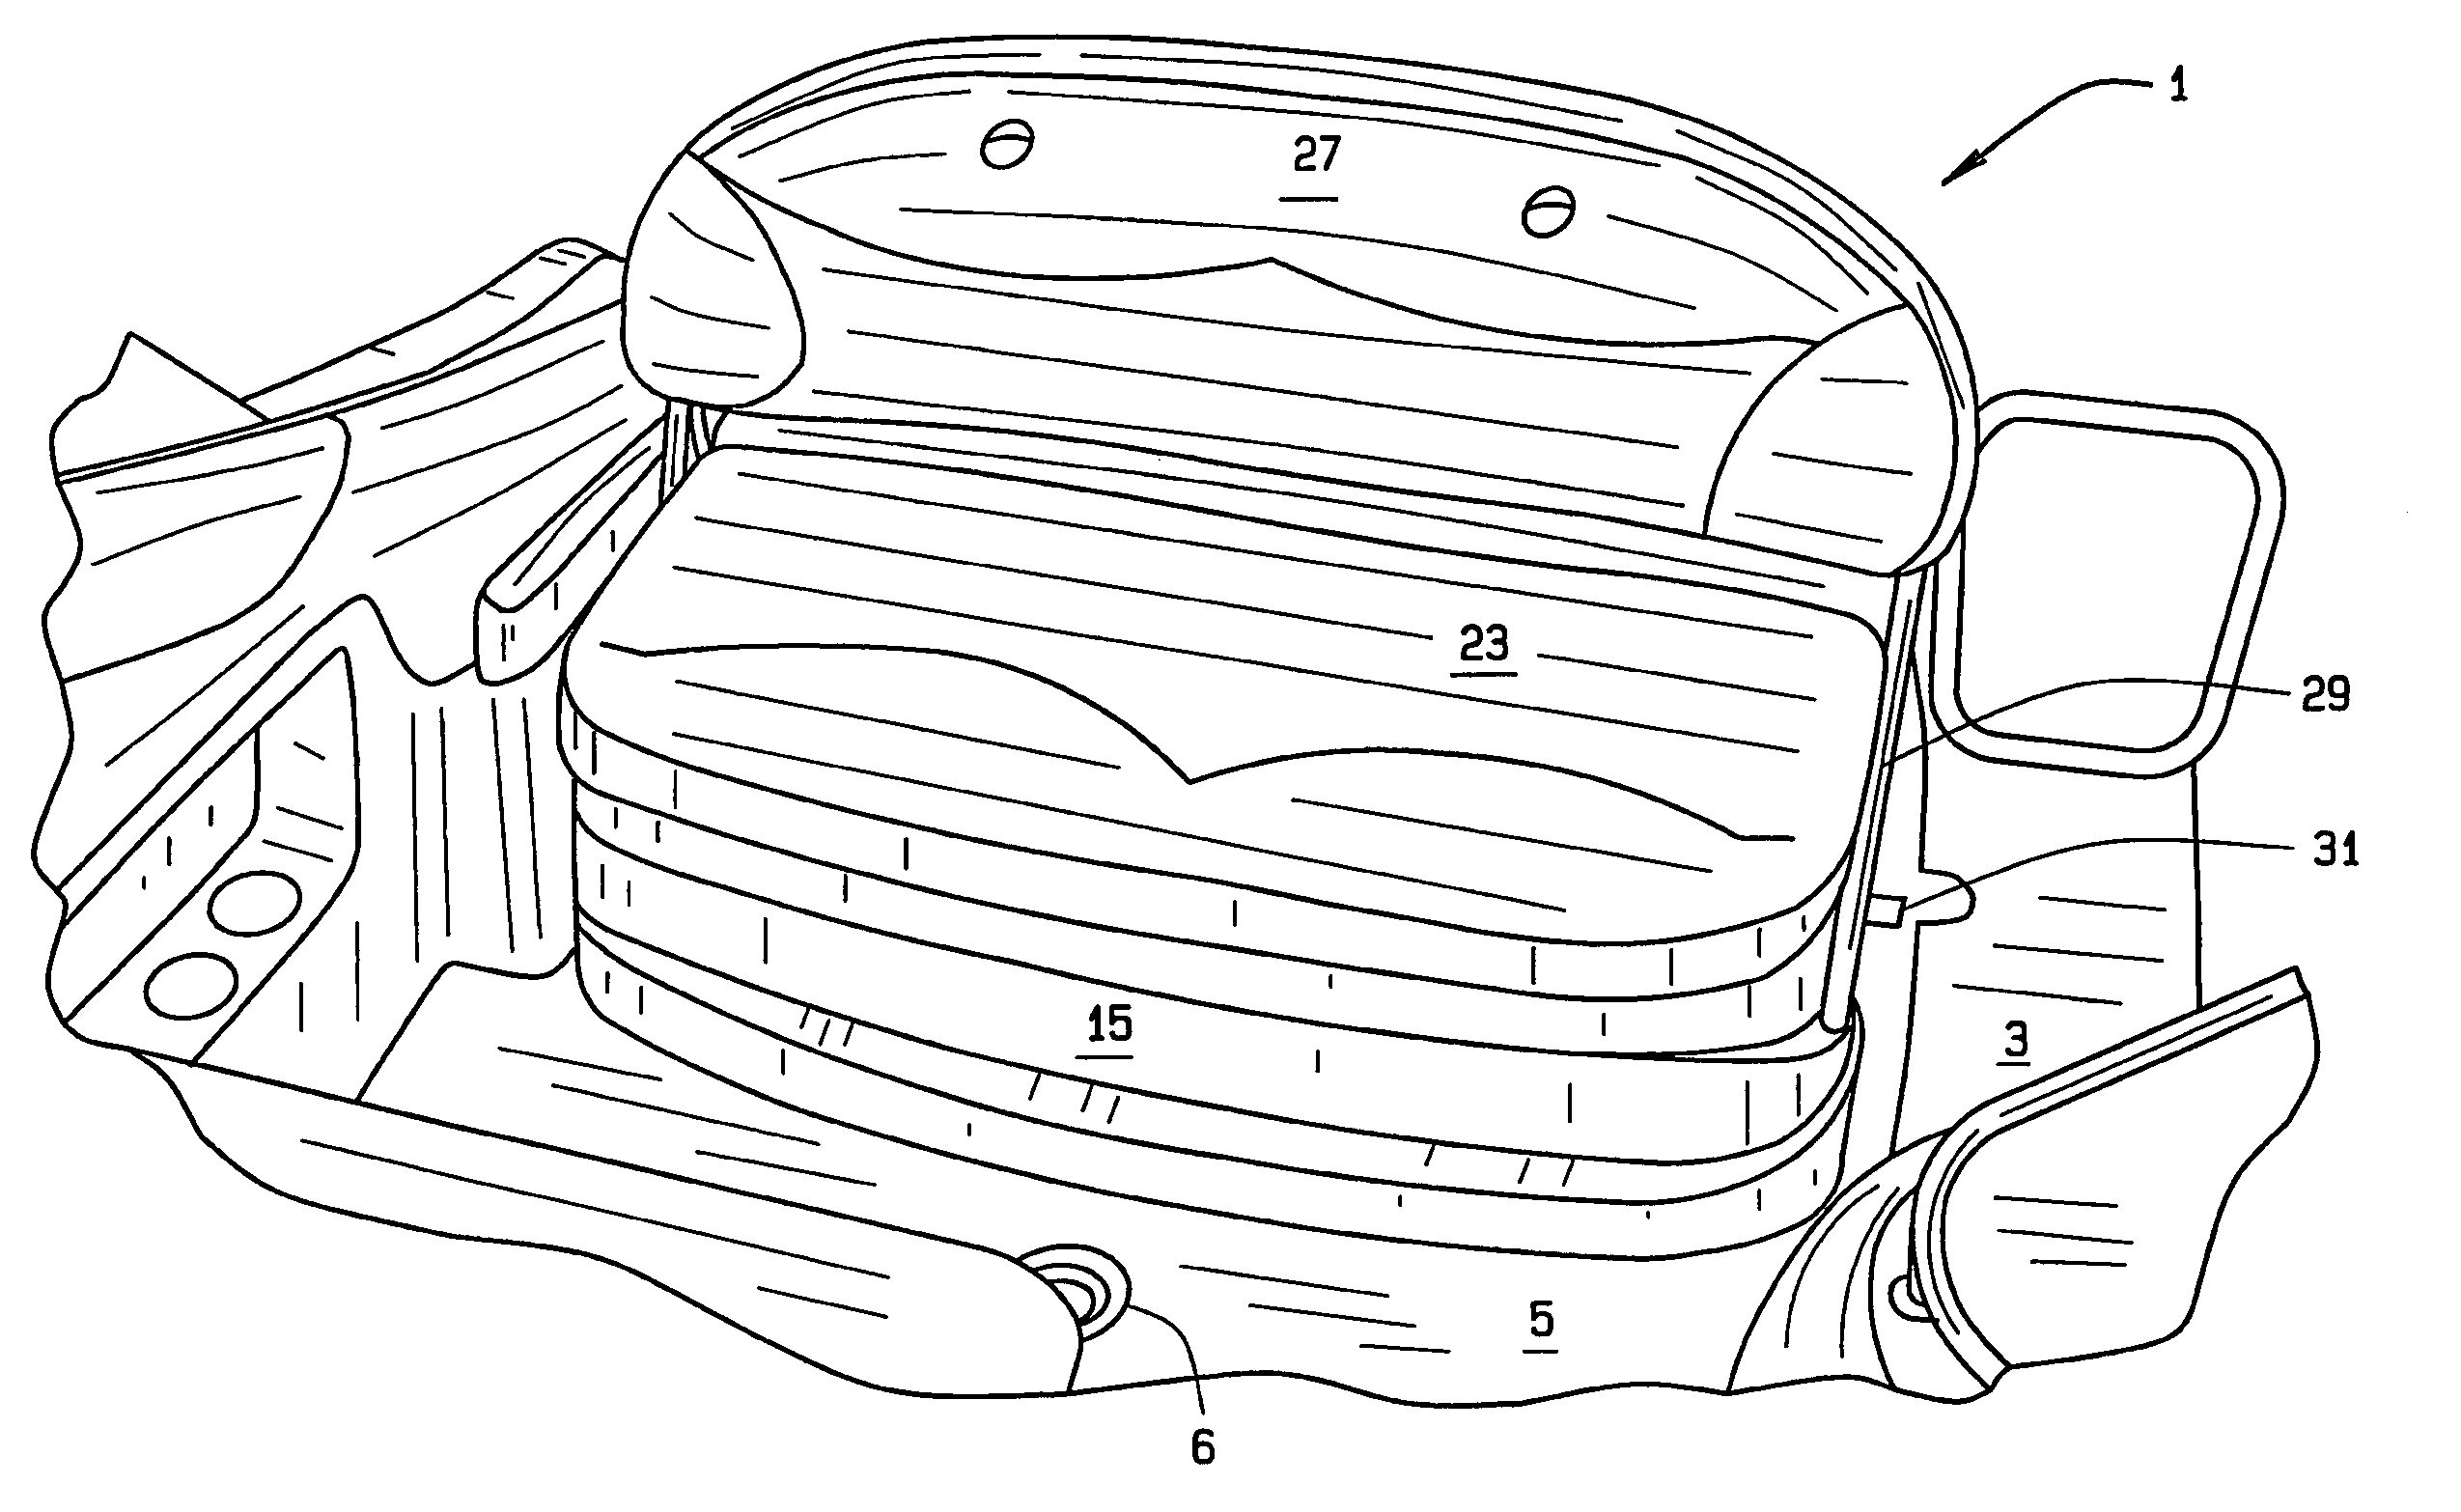 Hatch assembly with seat and storage bin